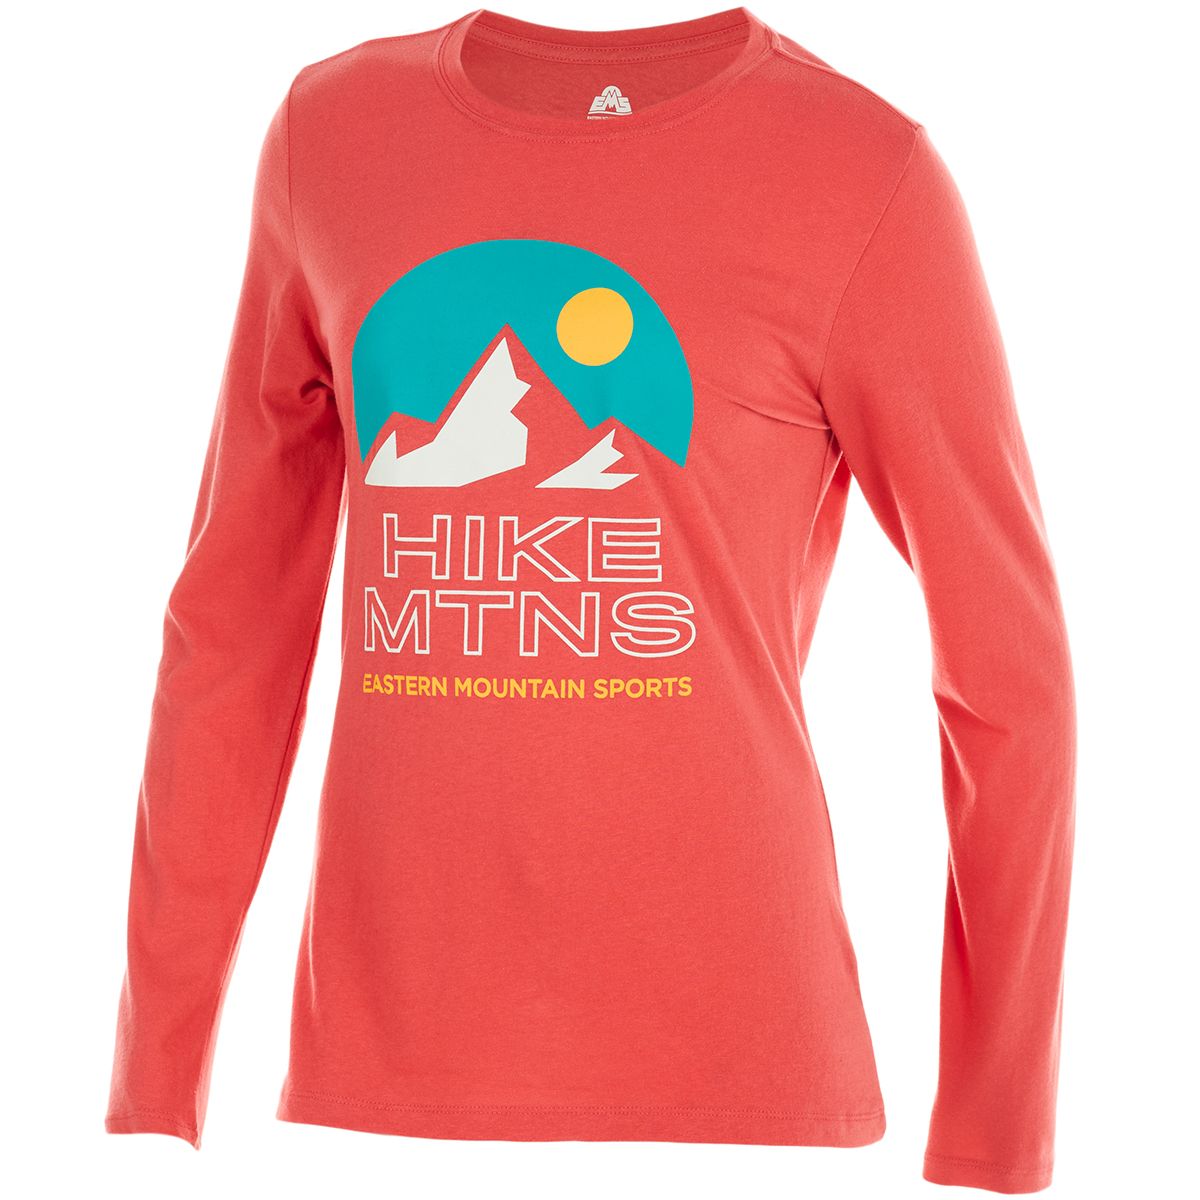 Top Graphic Tees & Our Best Pants! - Eastern Mountain Sports